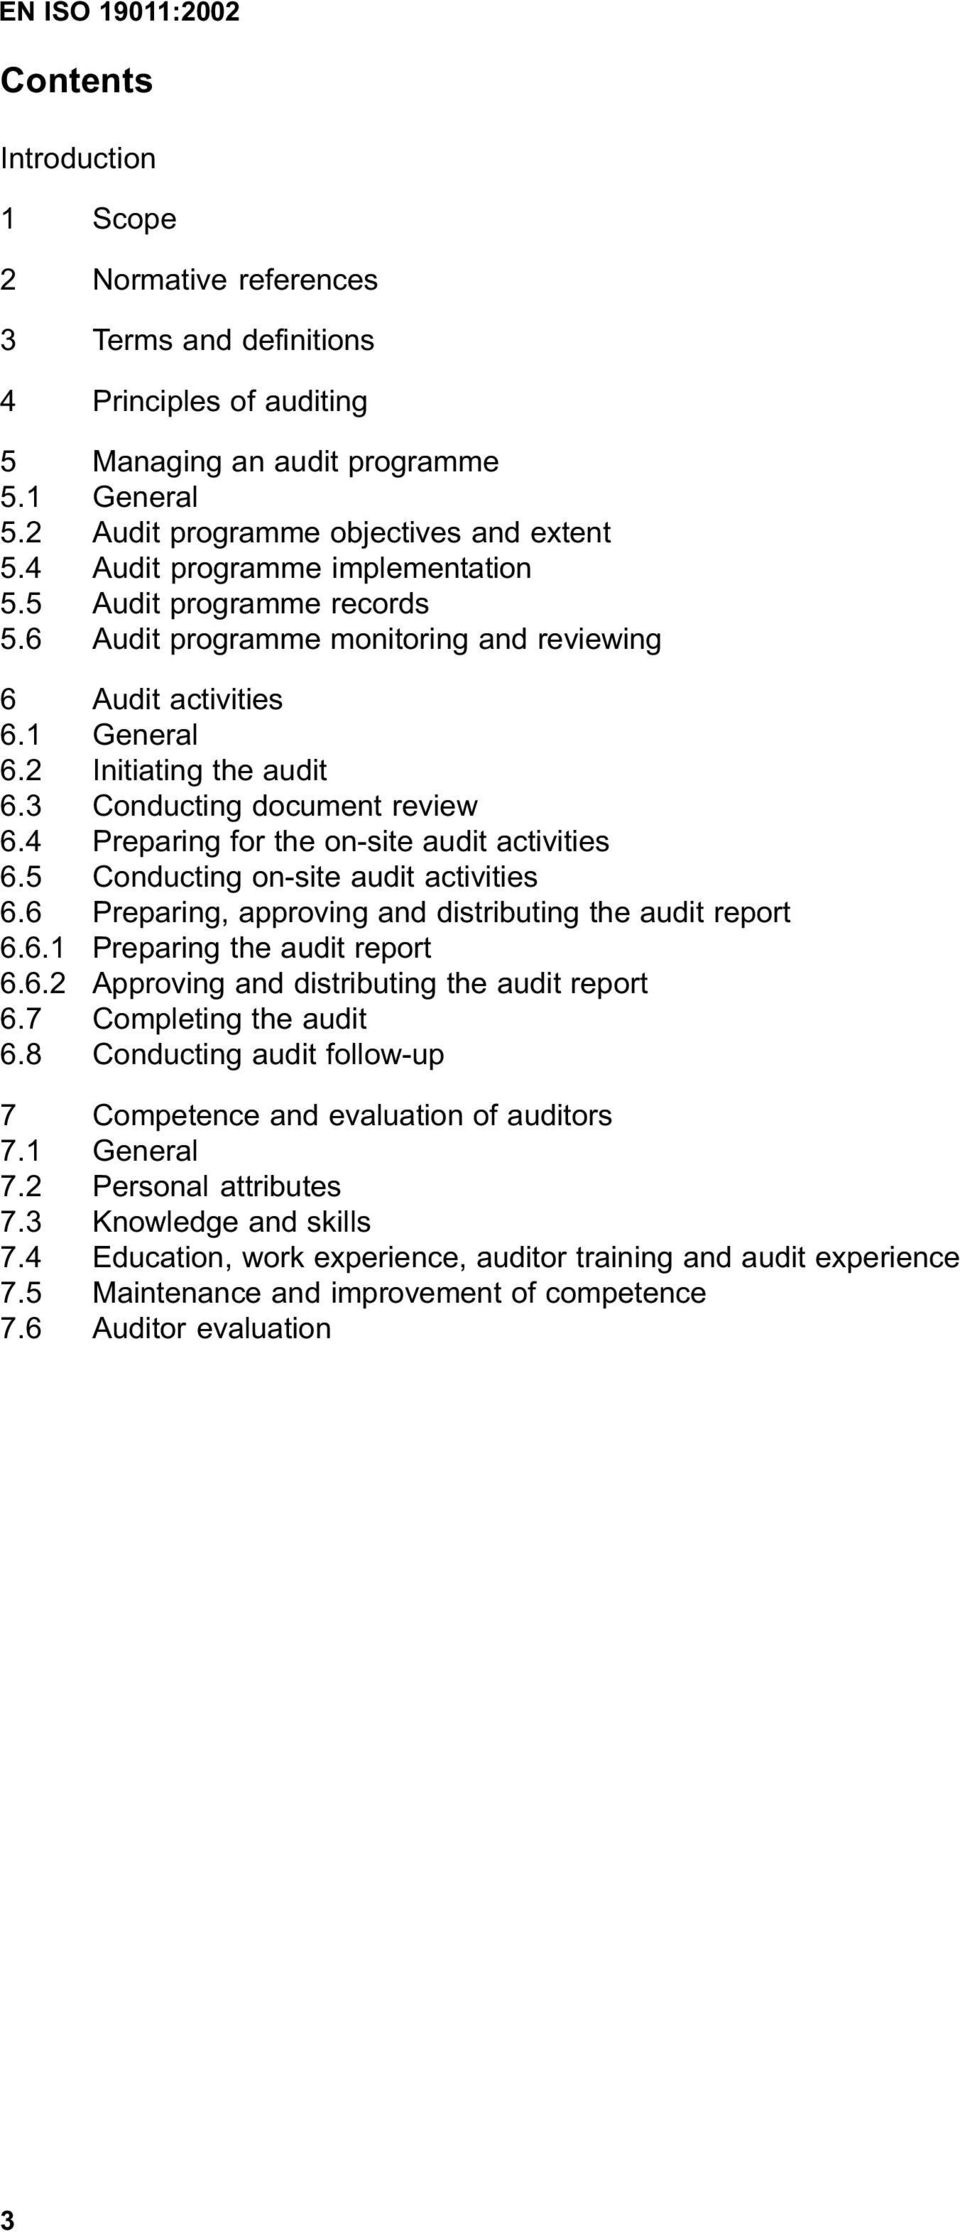 4 Preparing for the on-site audit activities 6.5 Conducting on-site audit activities 6.6 Preparing, approving and distributing the audit report 6.6.1 Preparing the audit report 6.6.2 Approving and distributing the audit report 6.